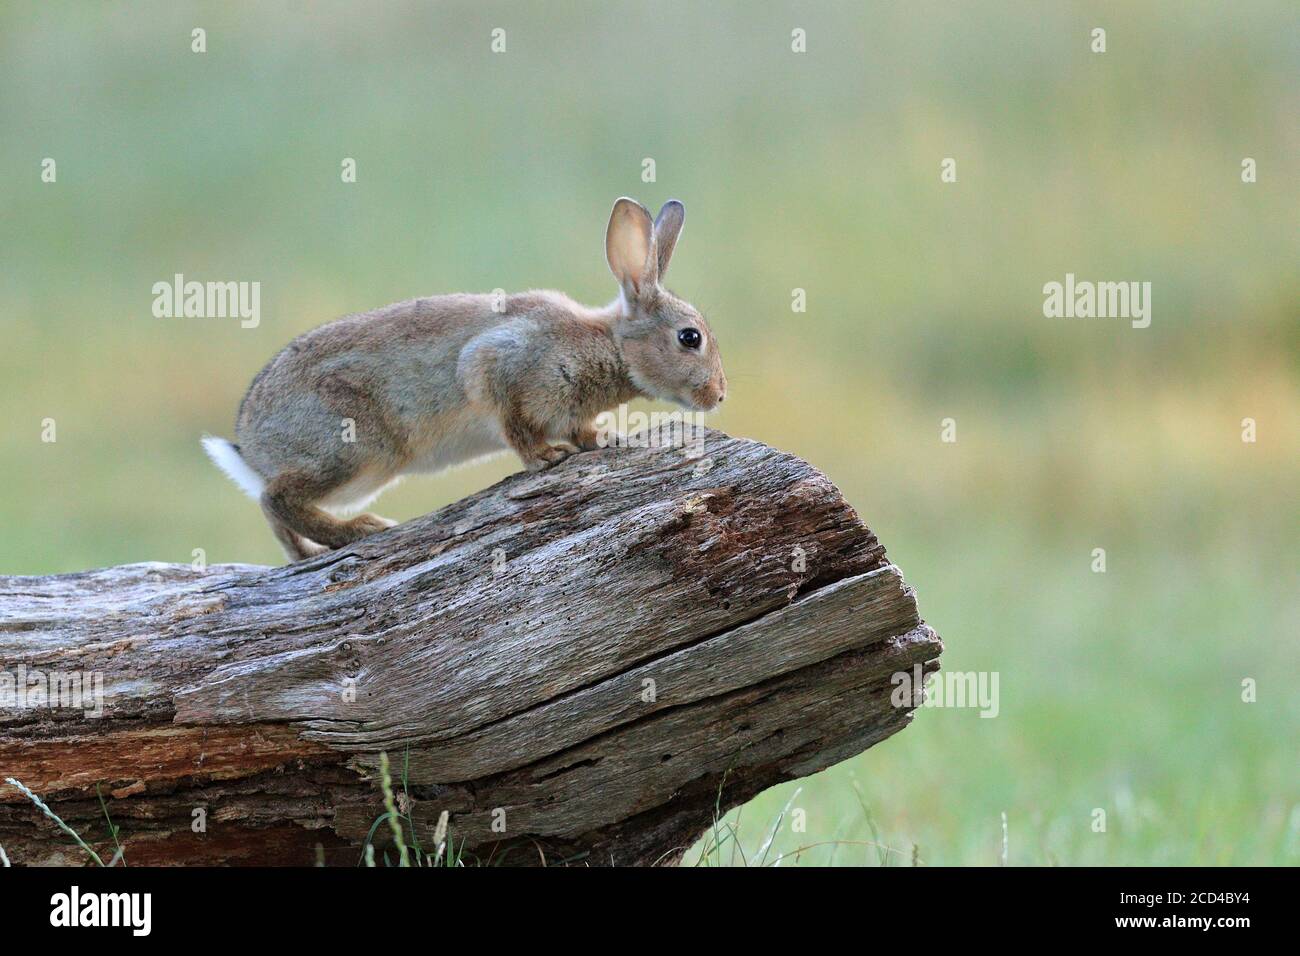 The European rabbit or coney is a species of rabbit native to southwestern Europe and to northwest Africa. Stock Photo